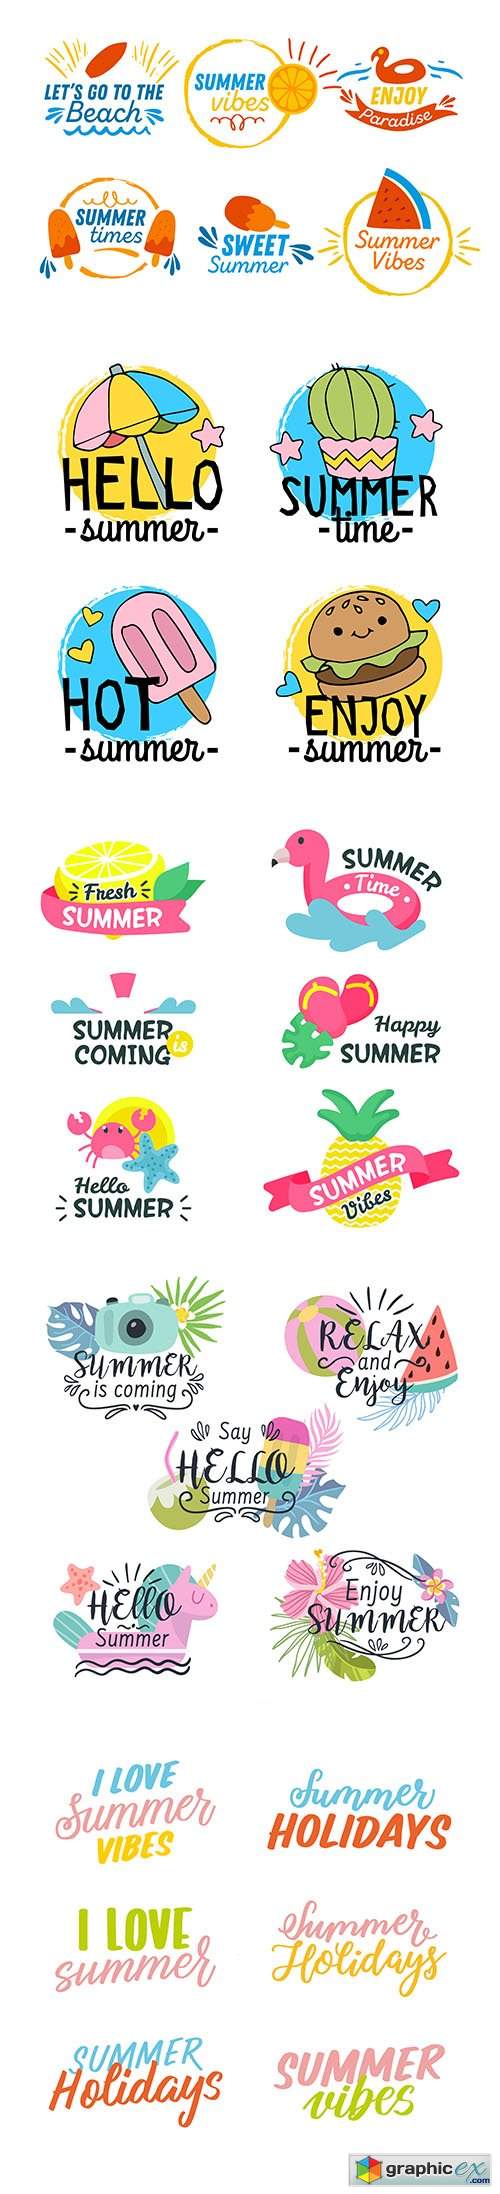  Colorful hand-drawn summer badge collection Vol2 